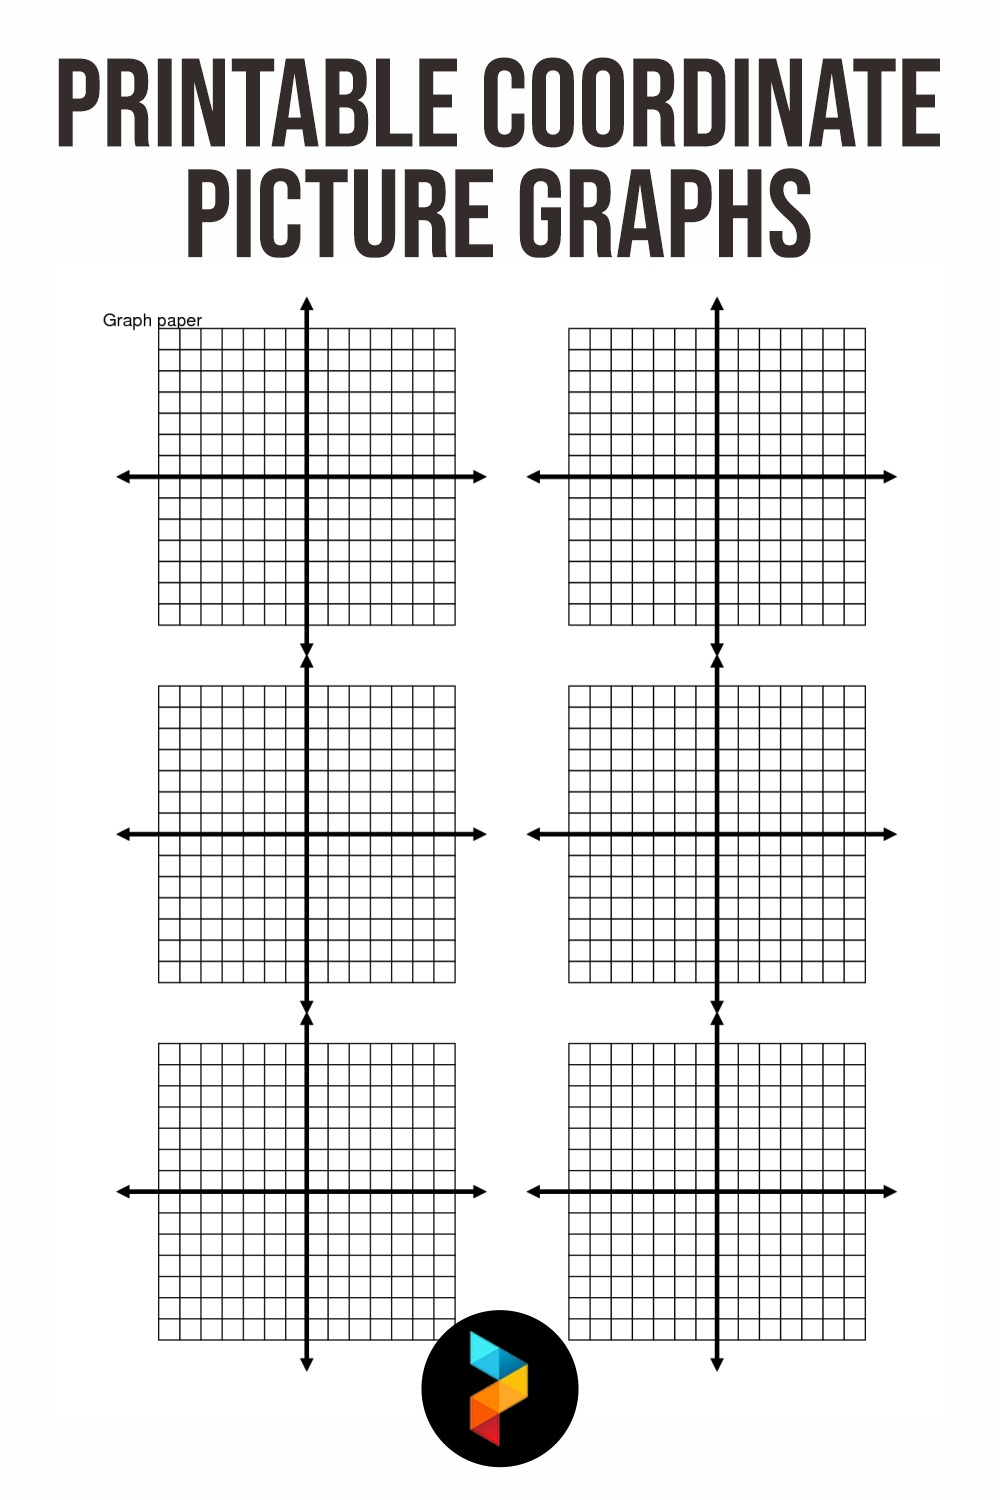 Printable Coordinate Picture Graphs